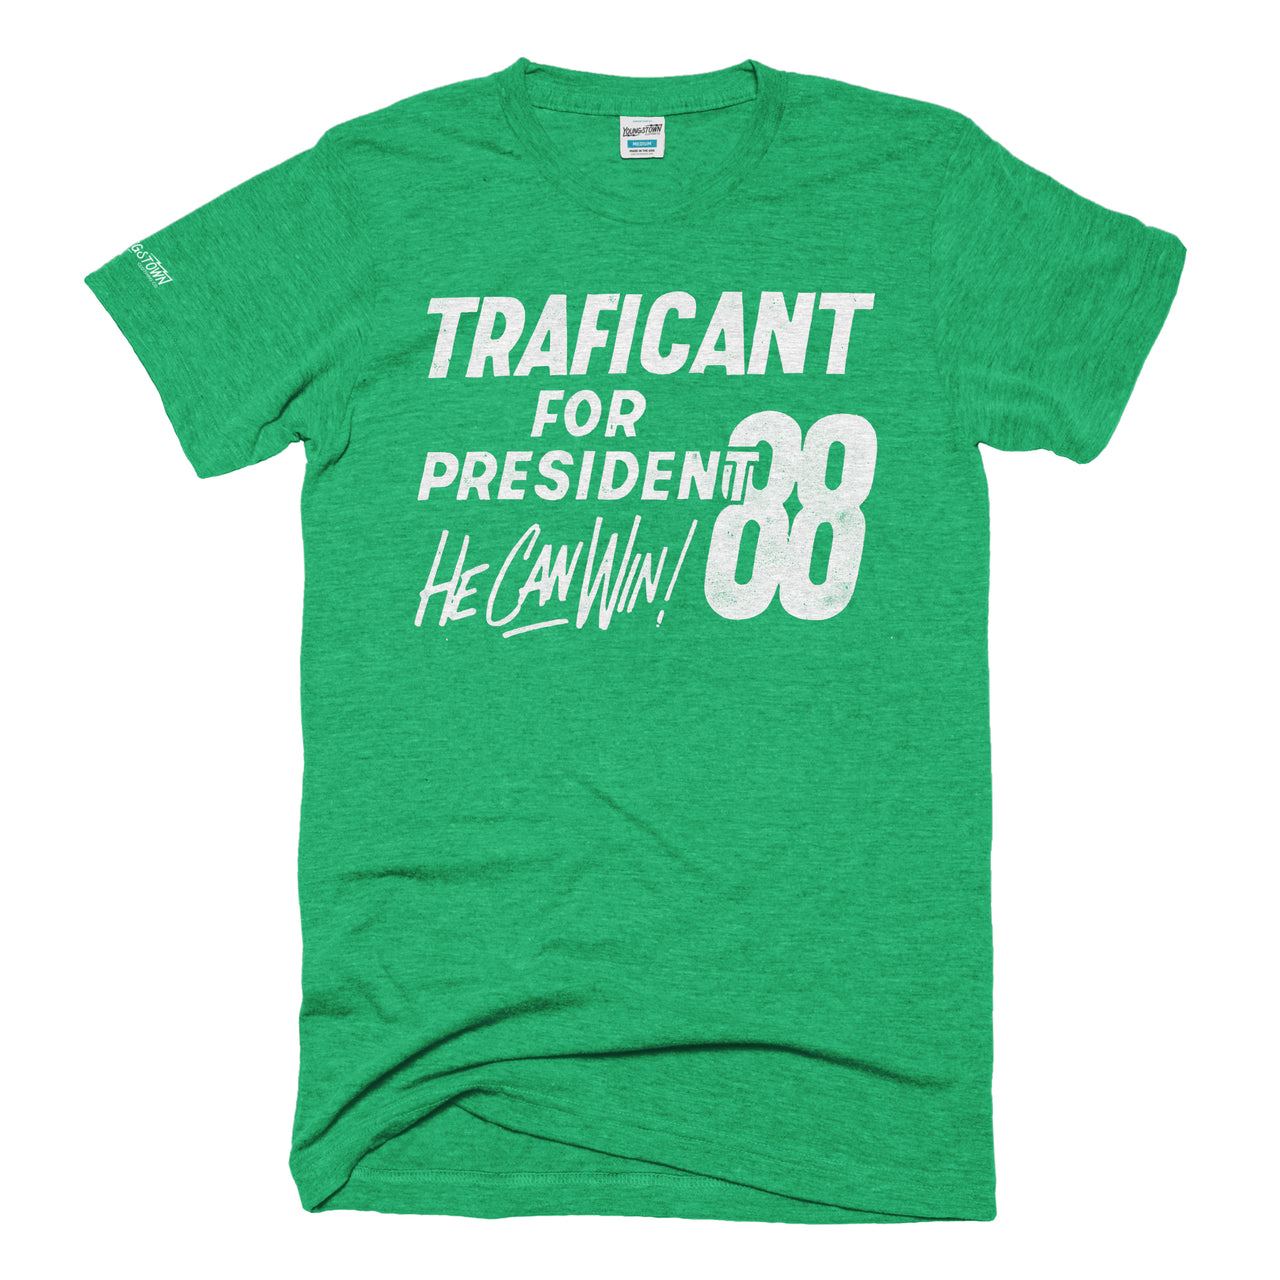 Traficant for President '88